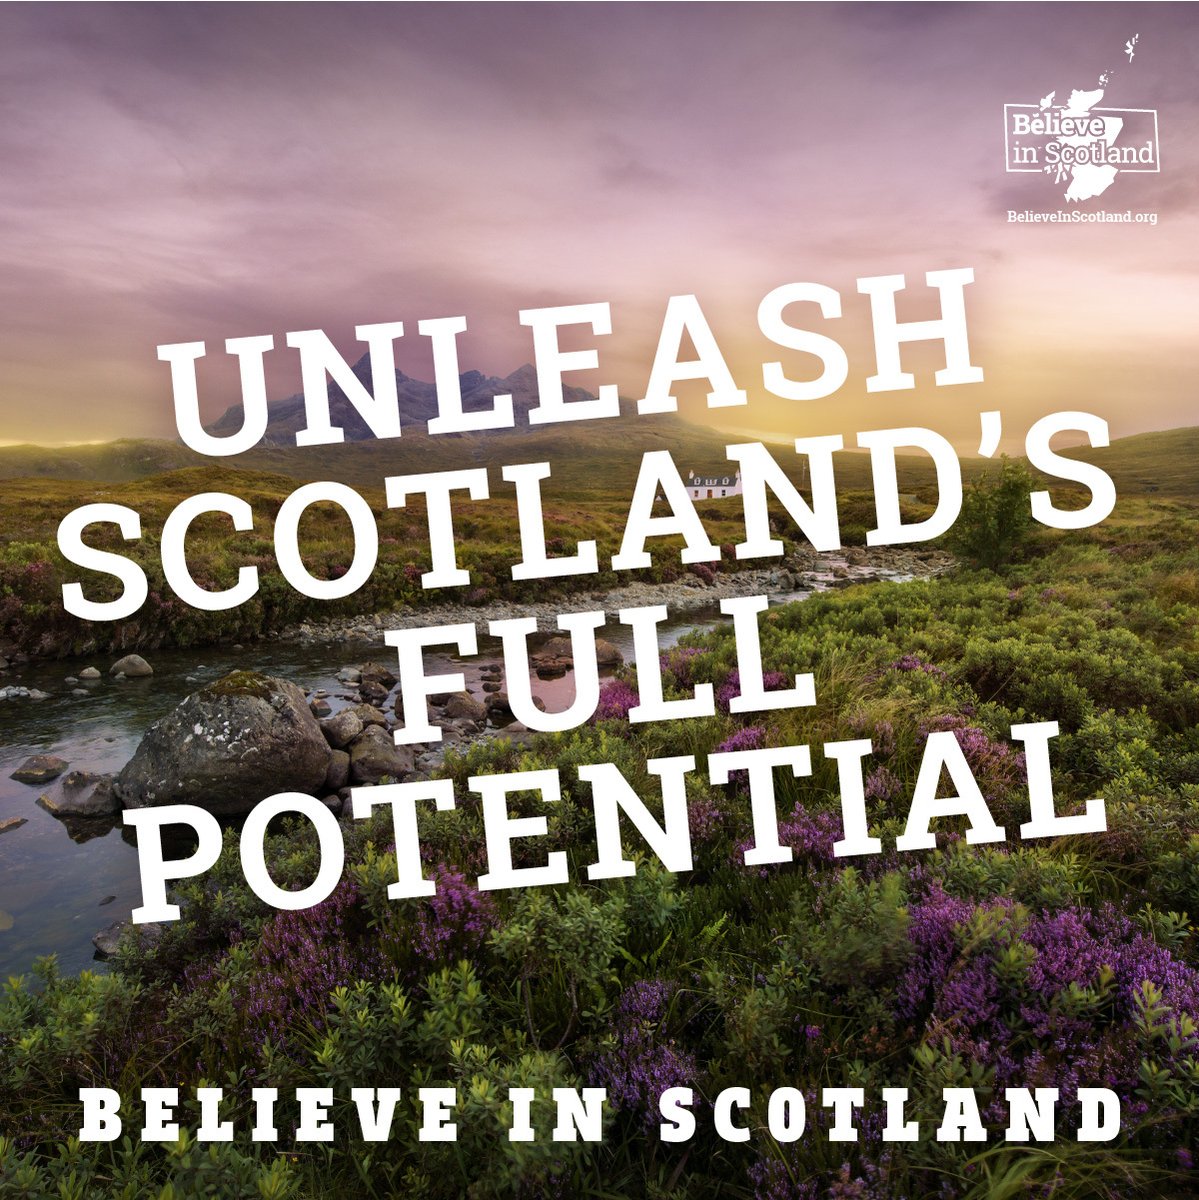 🏴󠁧󠁢󠁳󠁣󠁴󠁿 Let's unleash Scotland's full potential with the powers of independence. 🙌 Join the Grassroots movement today: believeinscotland.org